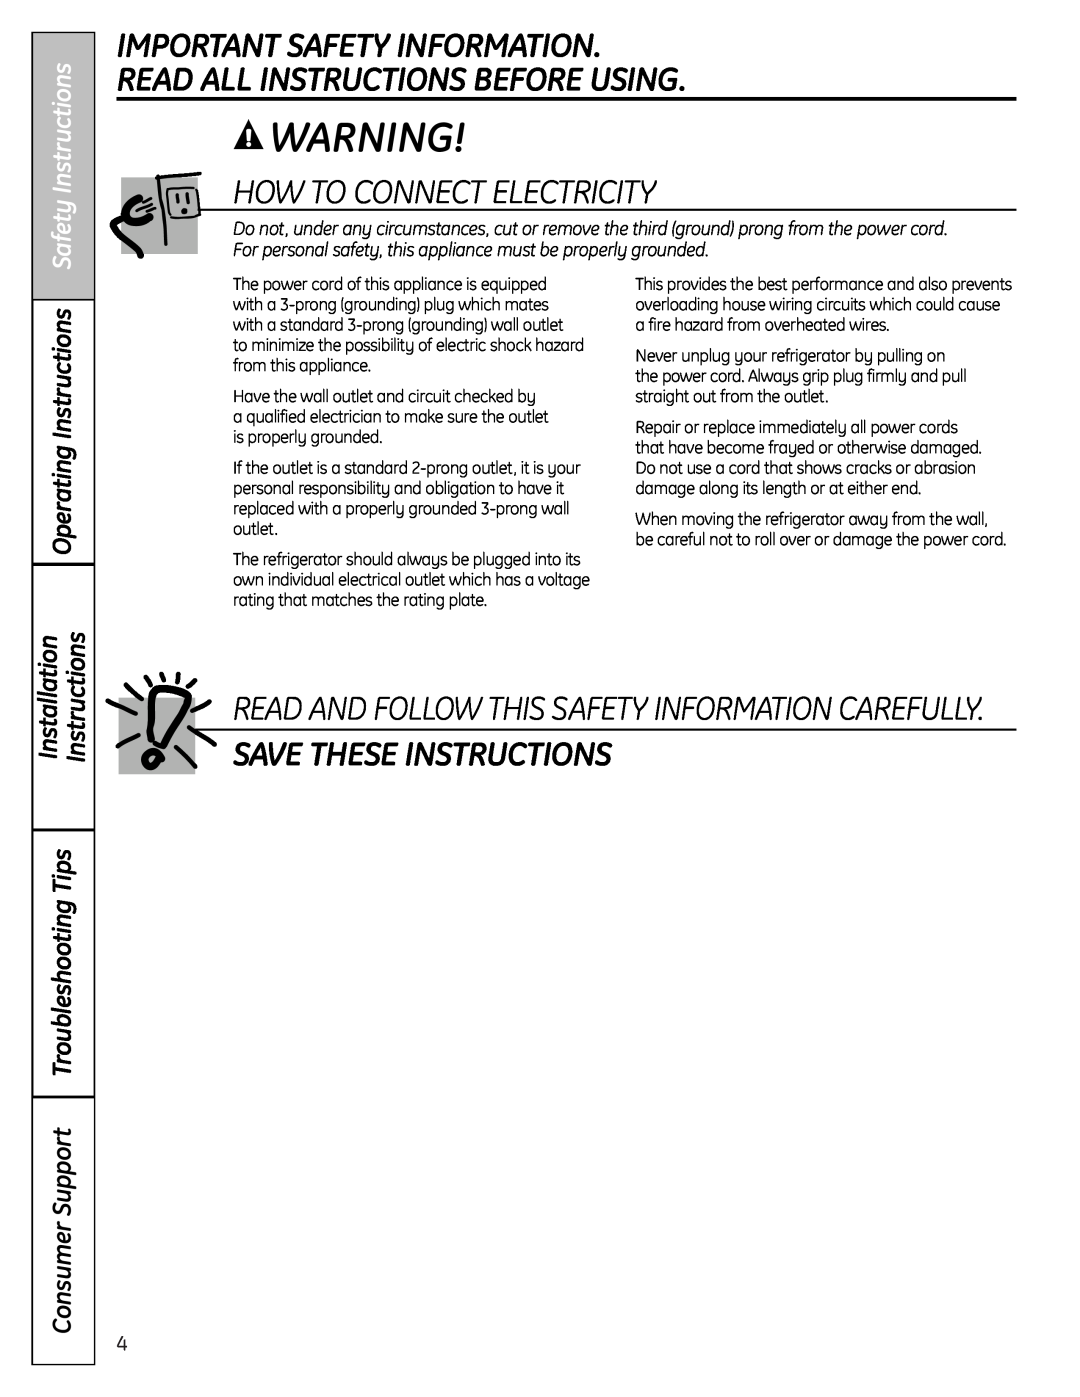 GE 26, 25 How To Connect Electricity, Save These Instructions, Operating Instructions, Safety Instructions, Installation 